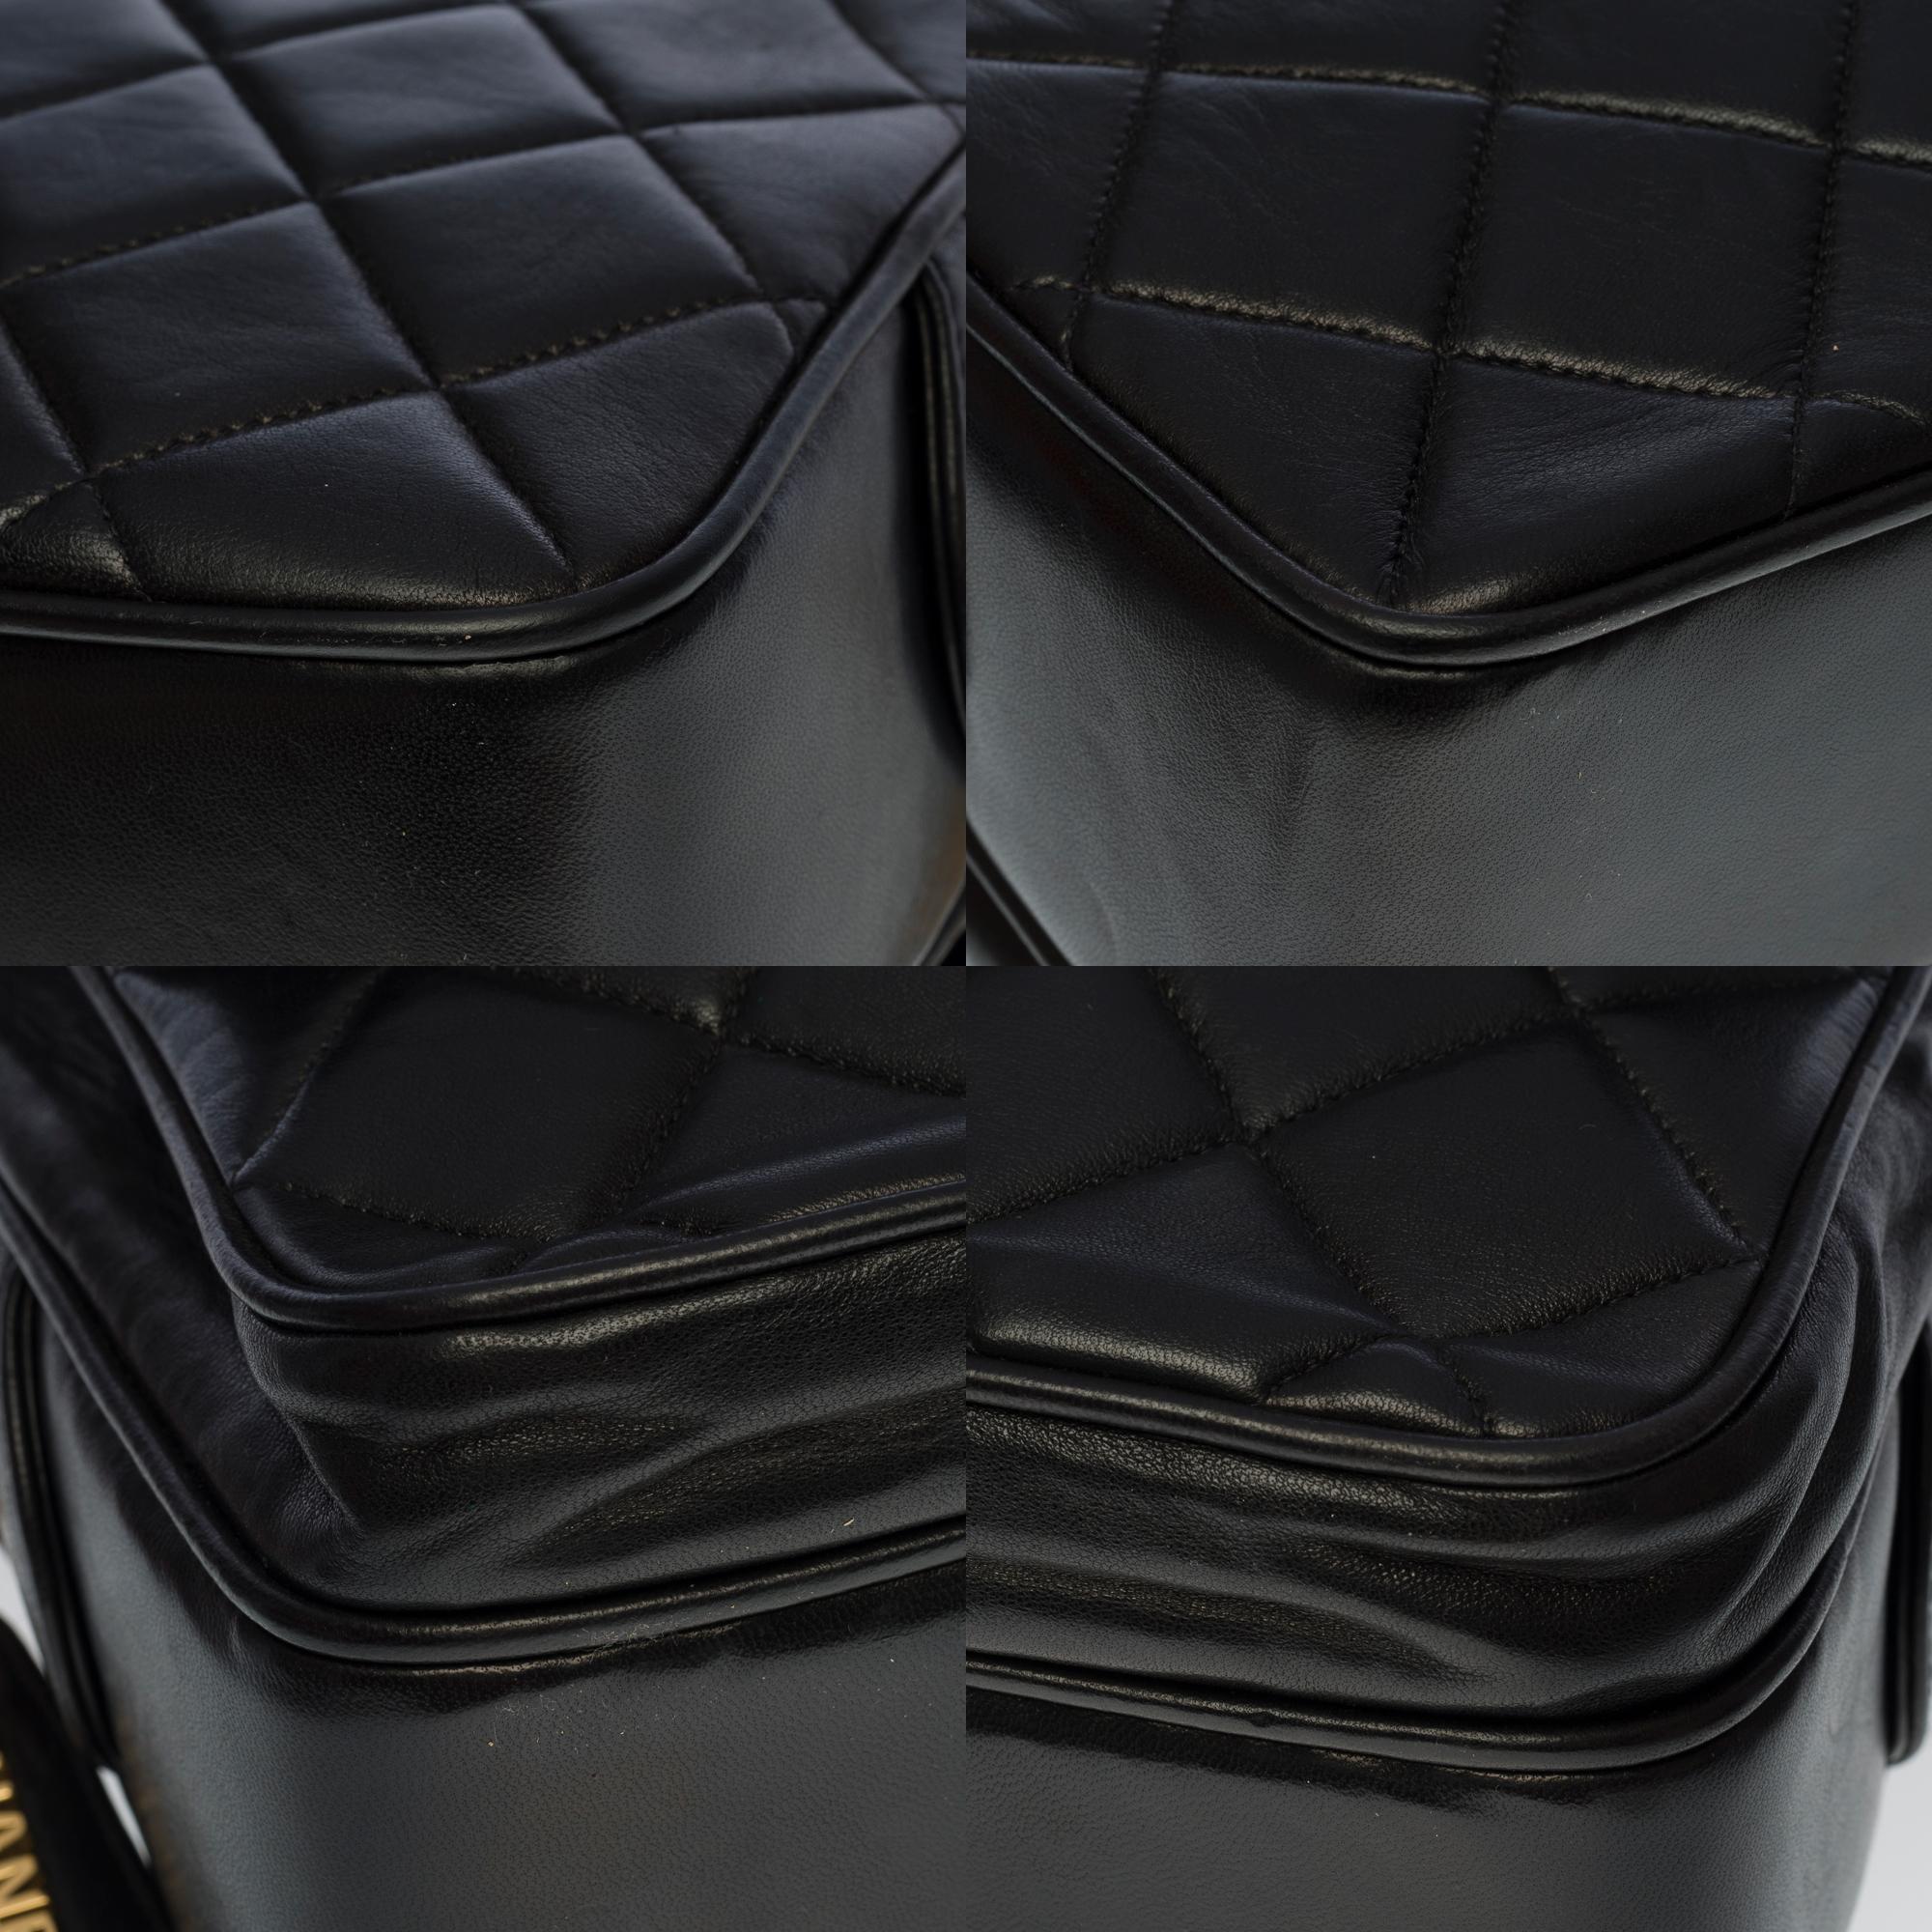 Chanel Camera GM shoulder flap bag in black quilted lambskin leather, GHW 4